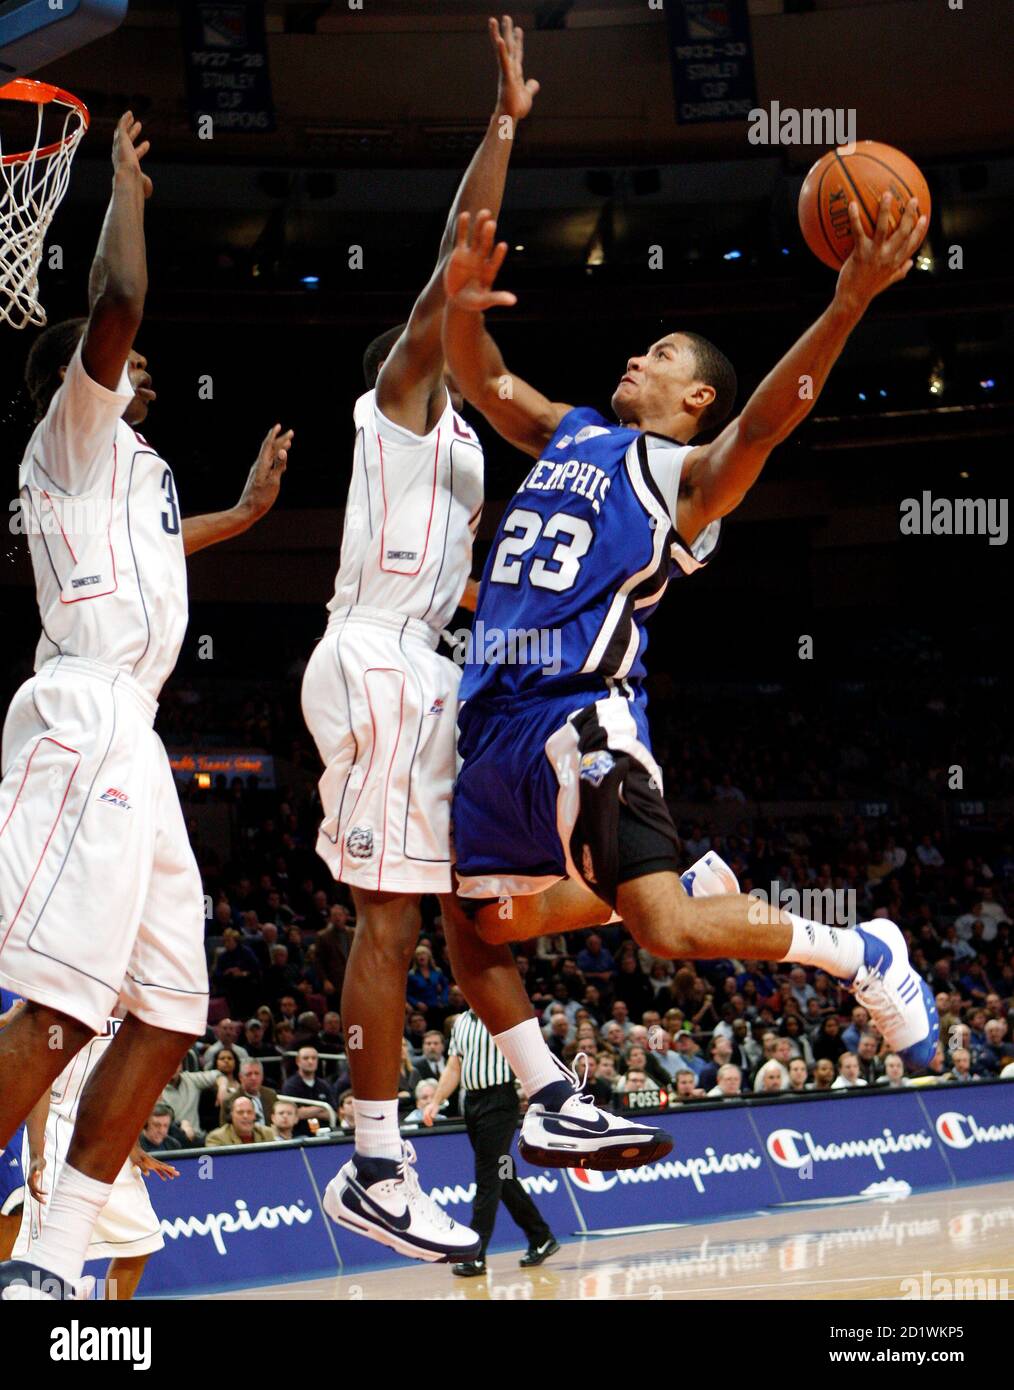 University of Memphis guard Derrick Rose (R), drives to the basket against  University of Connnecticut's Jerome Dyson (C) during the first half of the  championship game of the 2007 2K Sports College